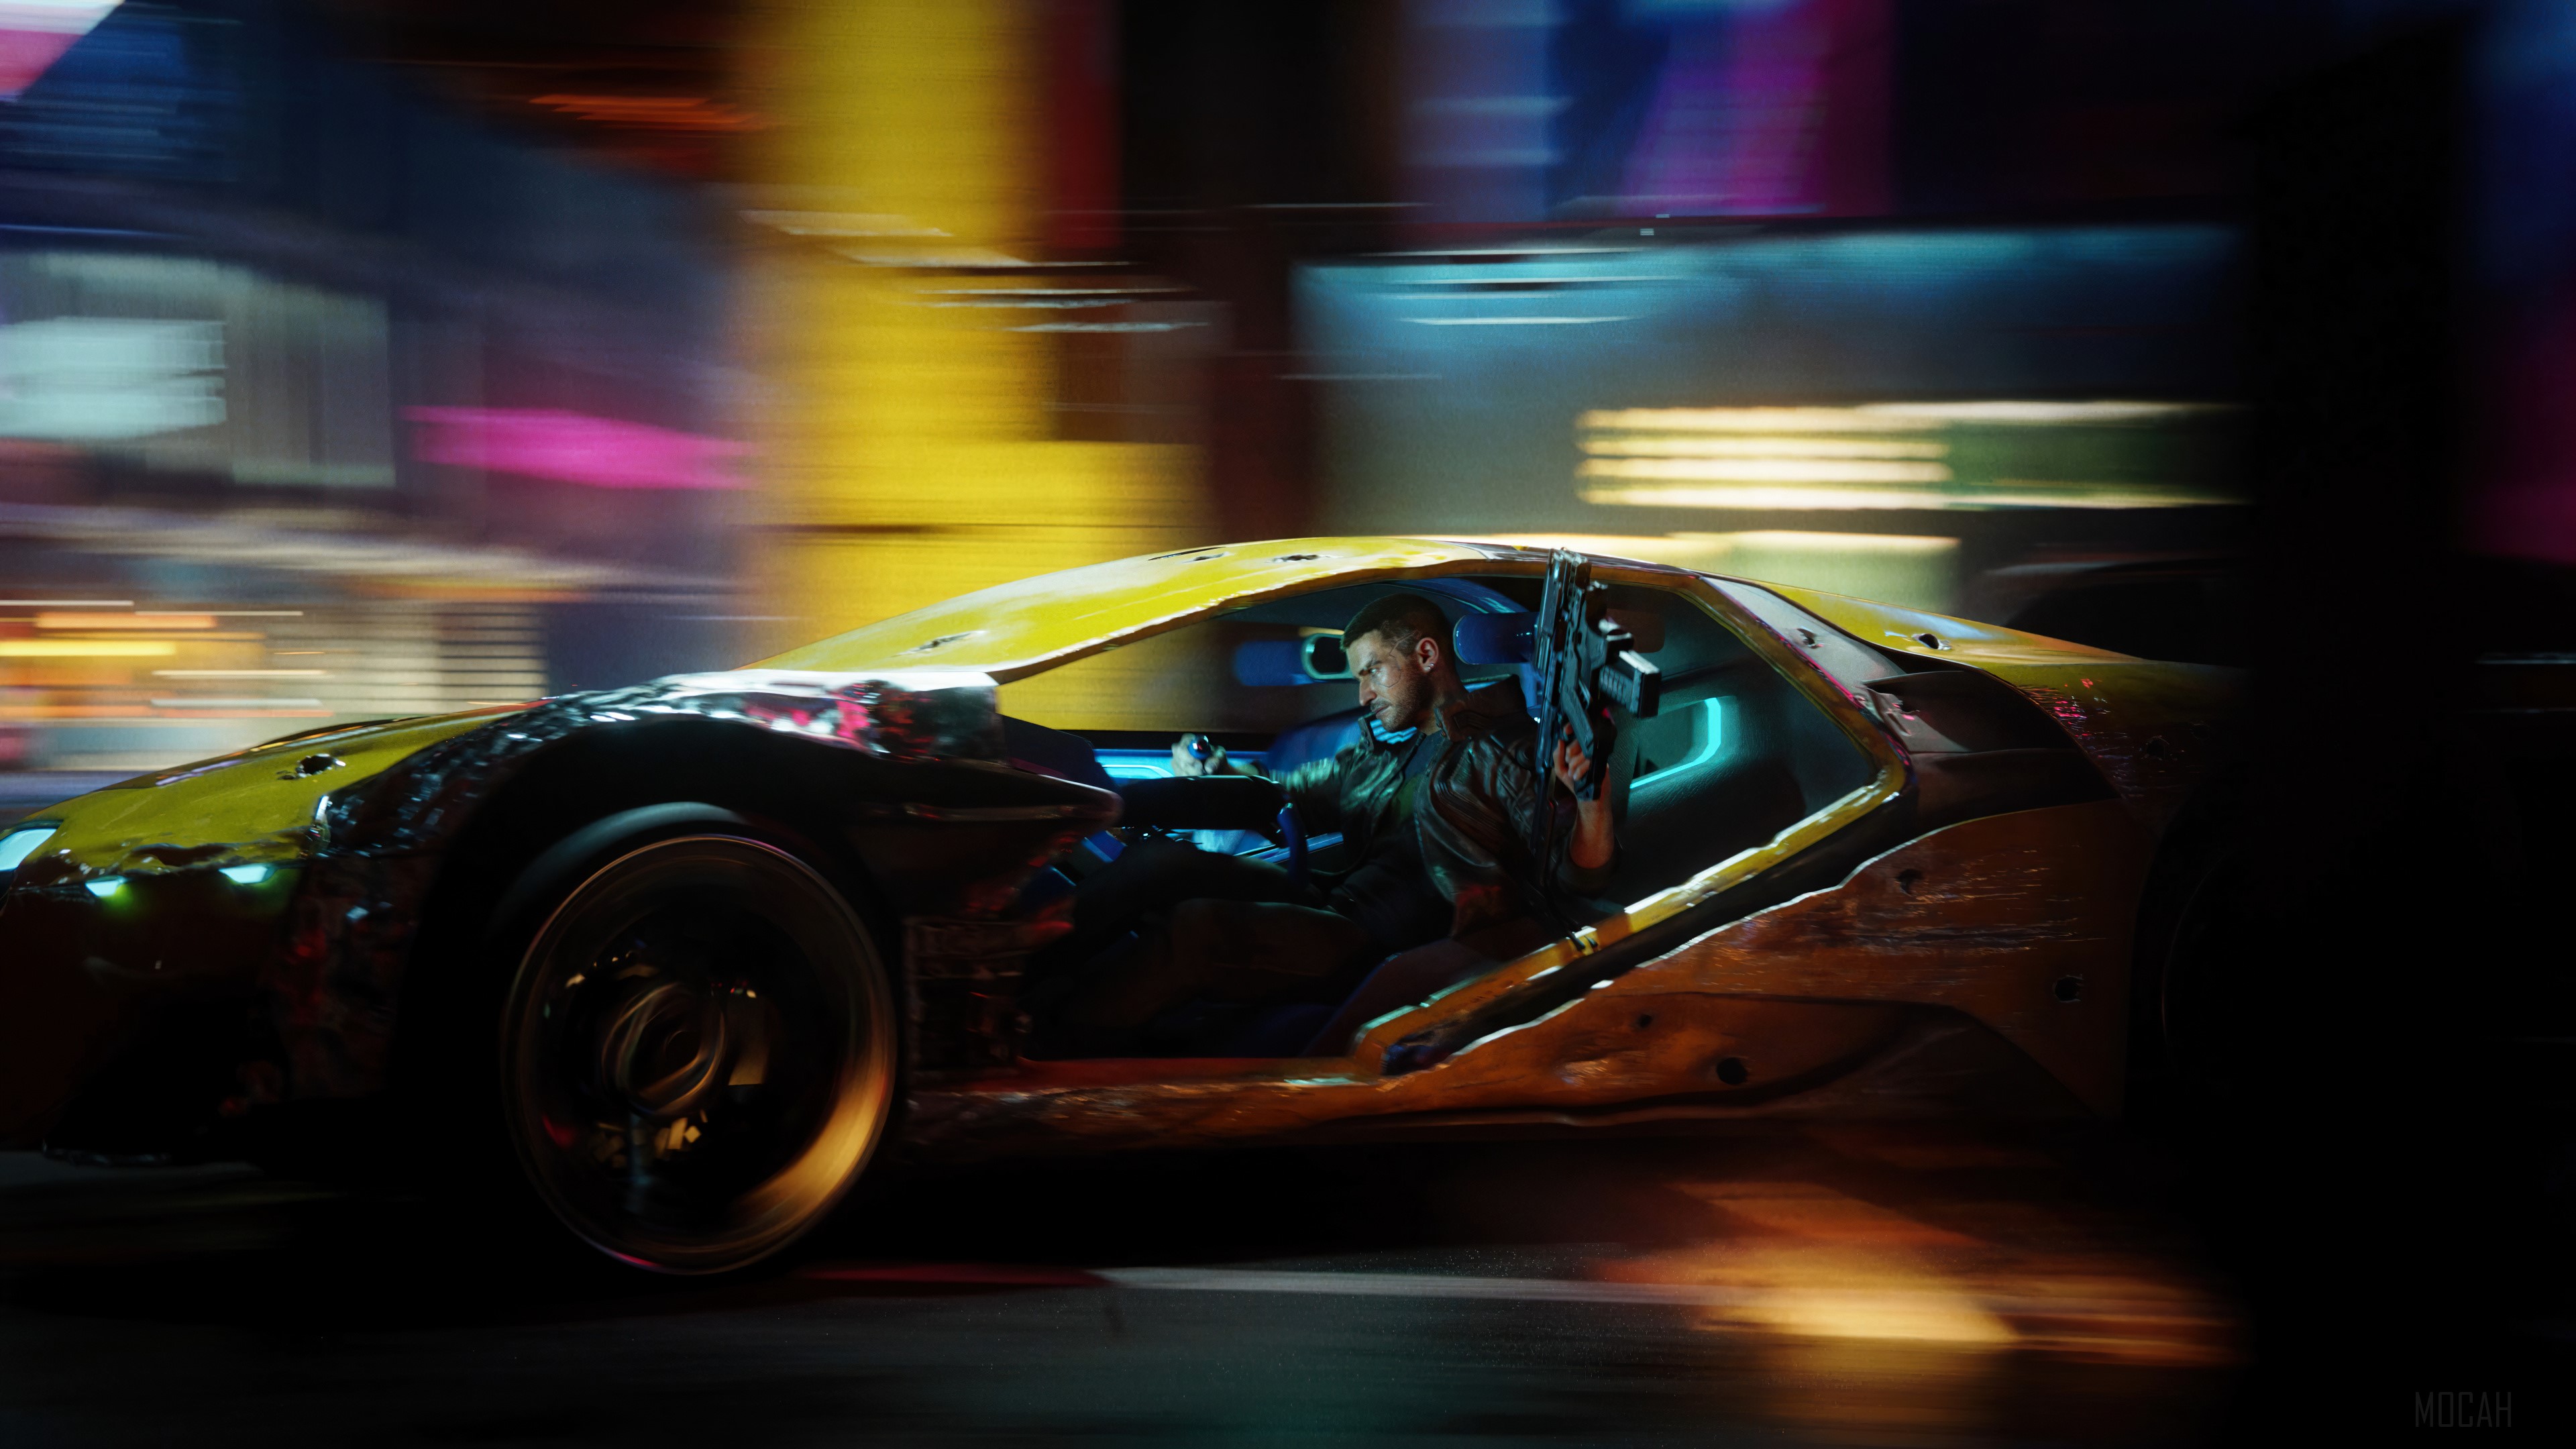 General 3840x2160 Racing driver video games gun side view blurry background blurred Cyberpunk 2077 video game men video game characters CD Projekt RED